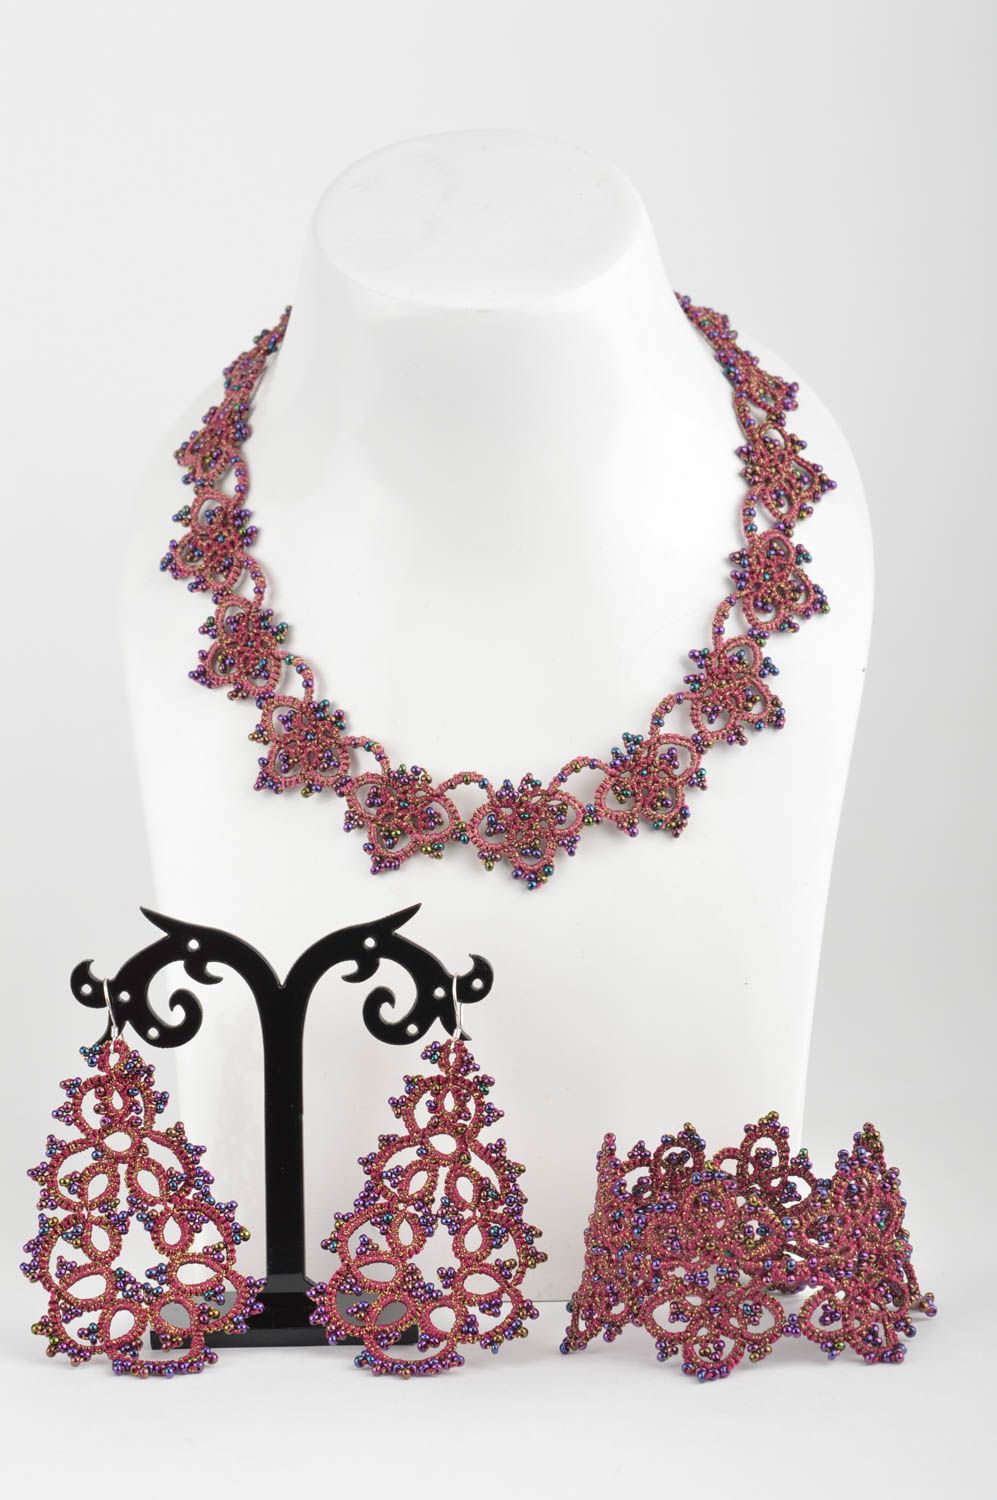 Handmade purple lace tatted jewelry set 3 items earrings bracelet and necklace photo 3